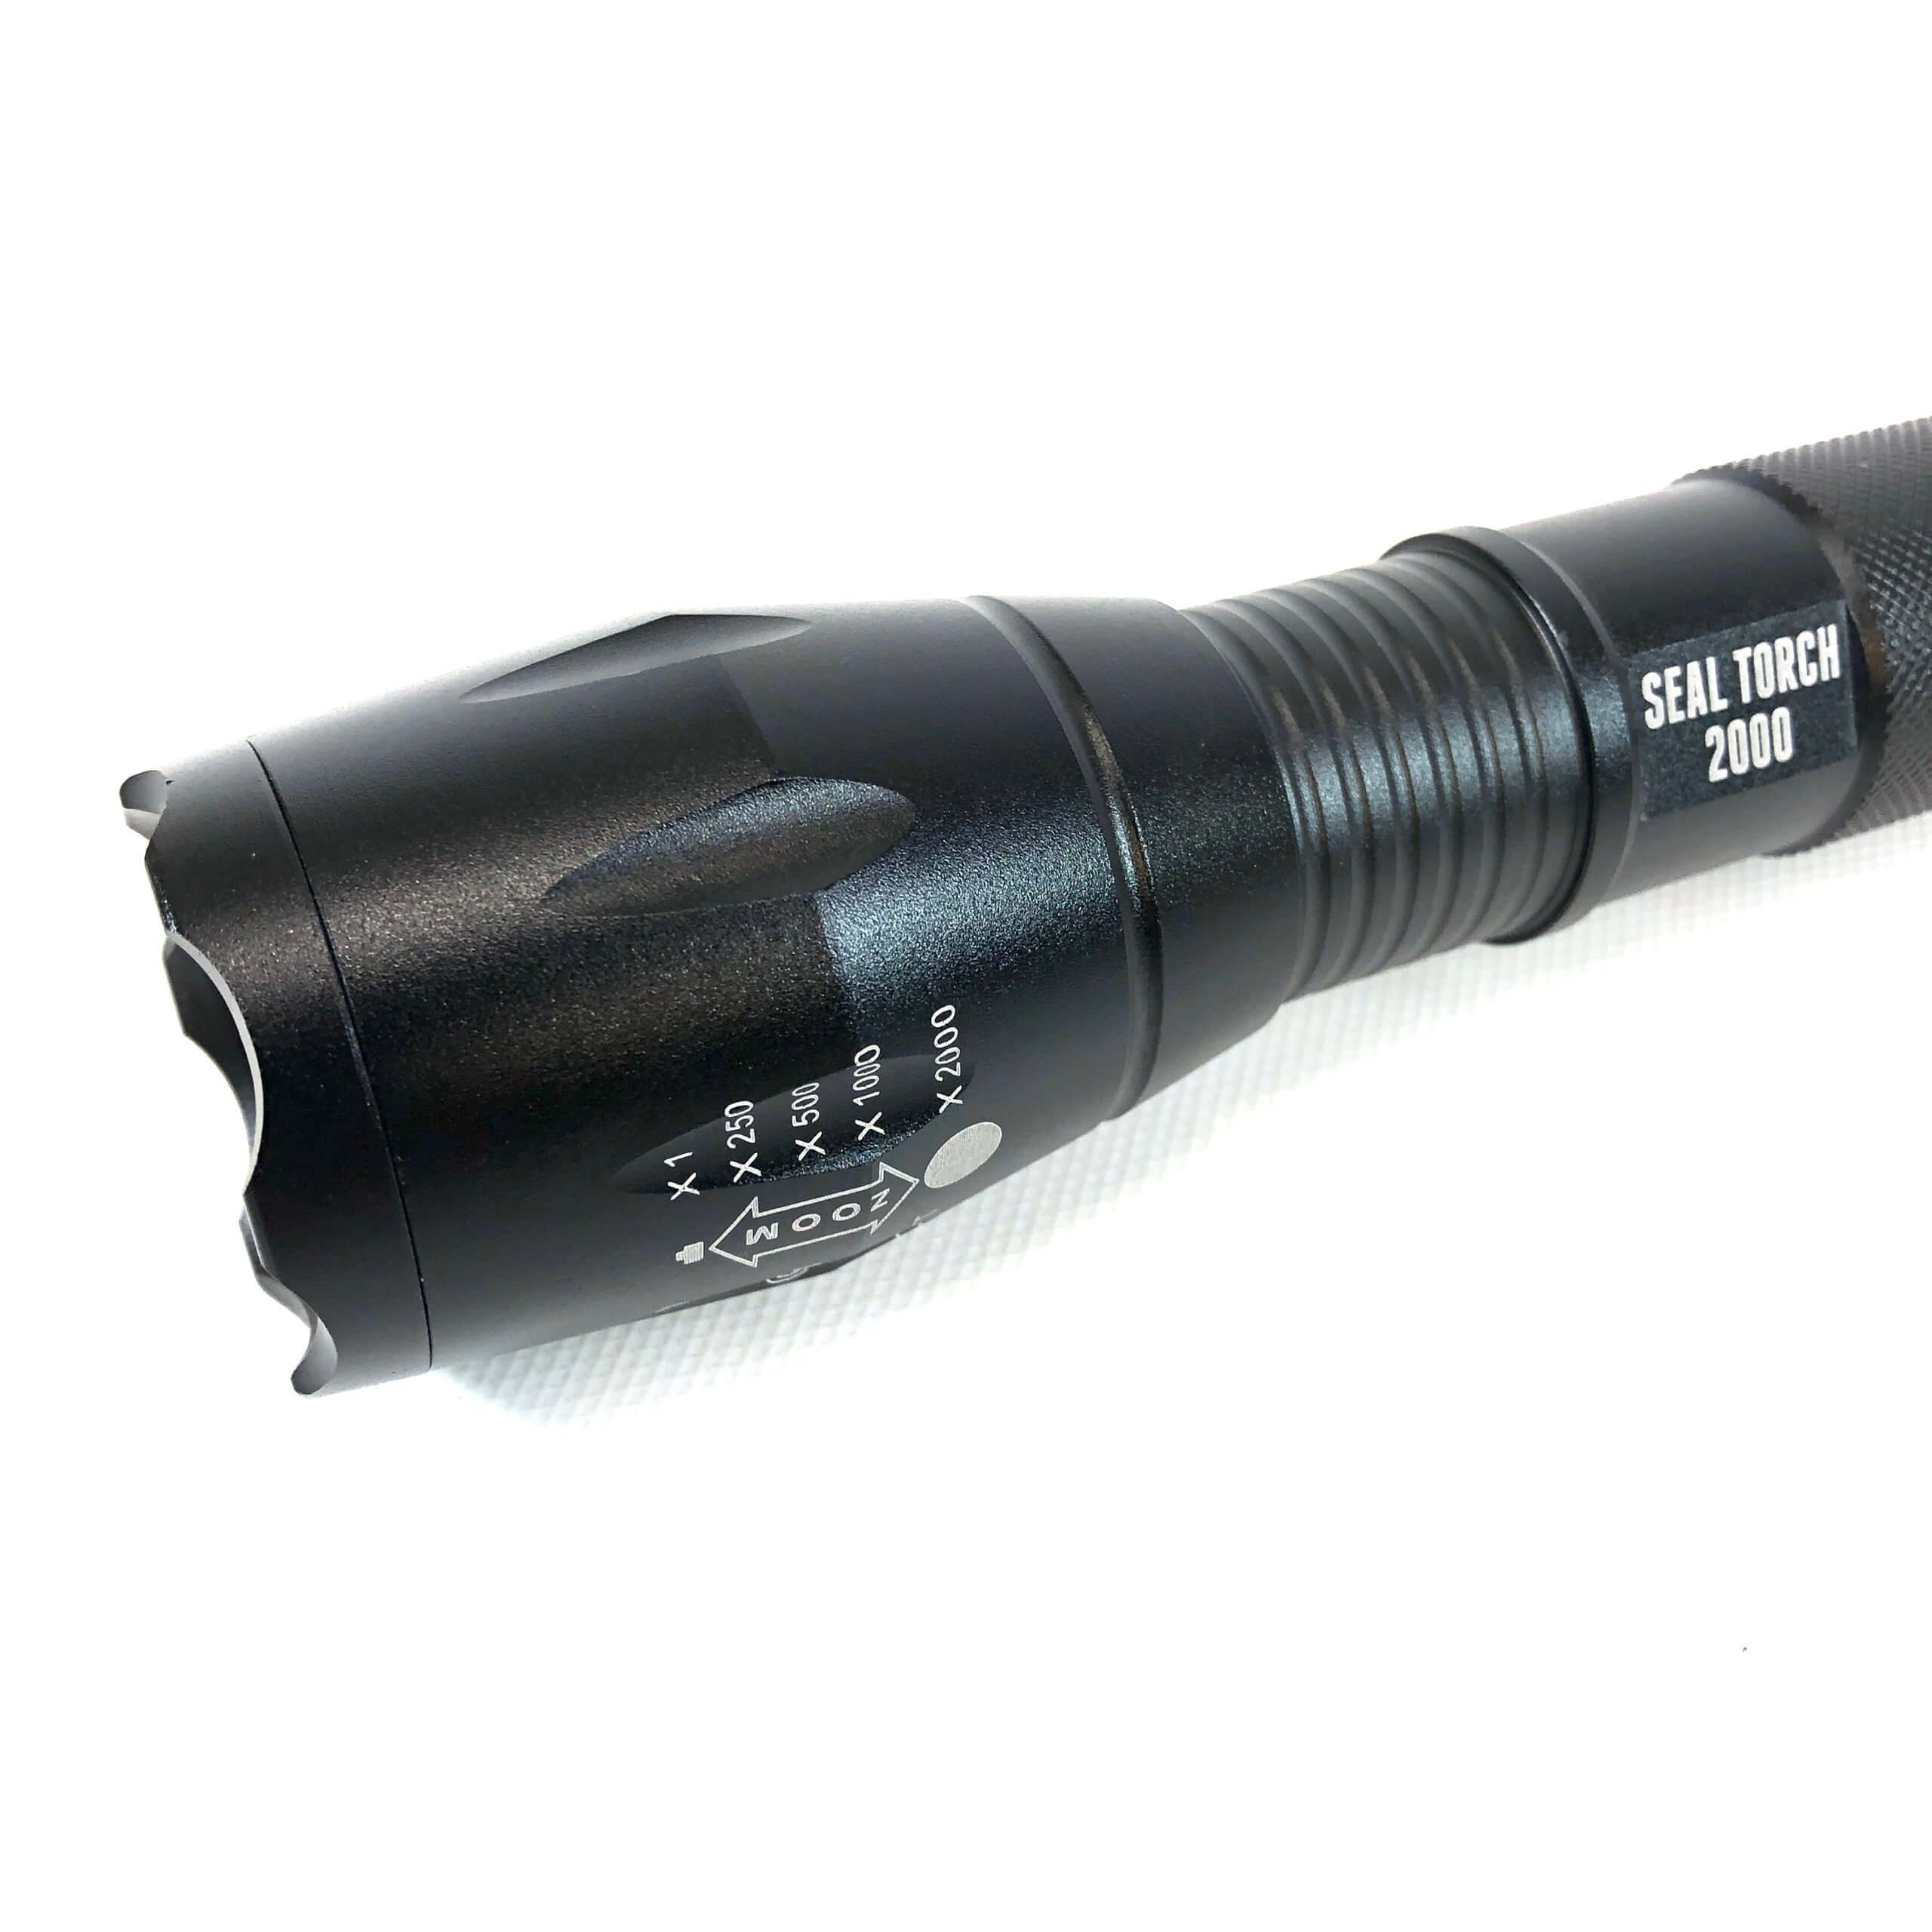 Wolfpark,XML-T6 Tactical HighLED Flashlight military police navy seal 2000 Lumen 